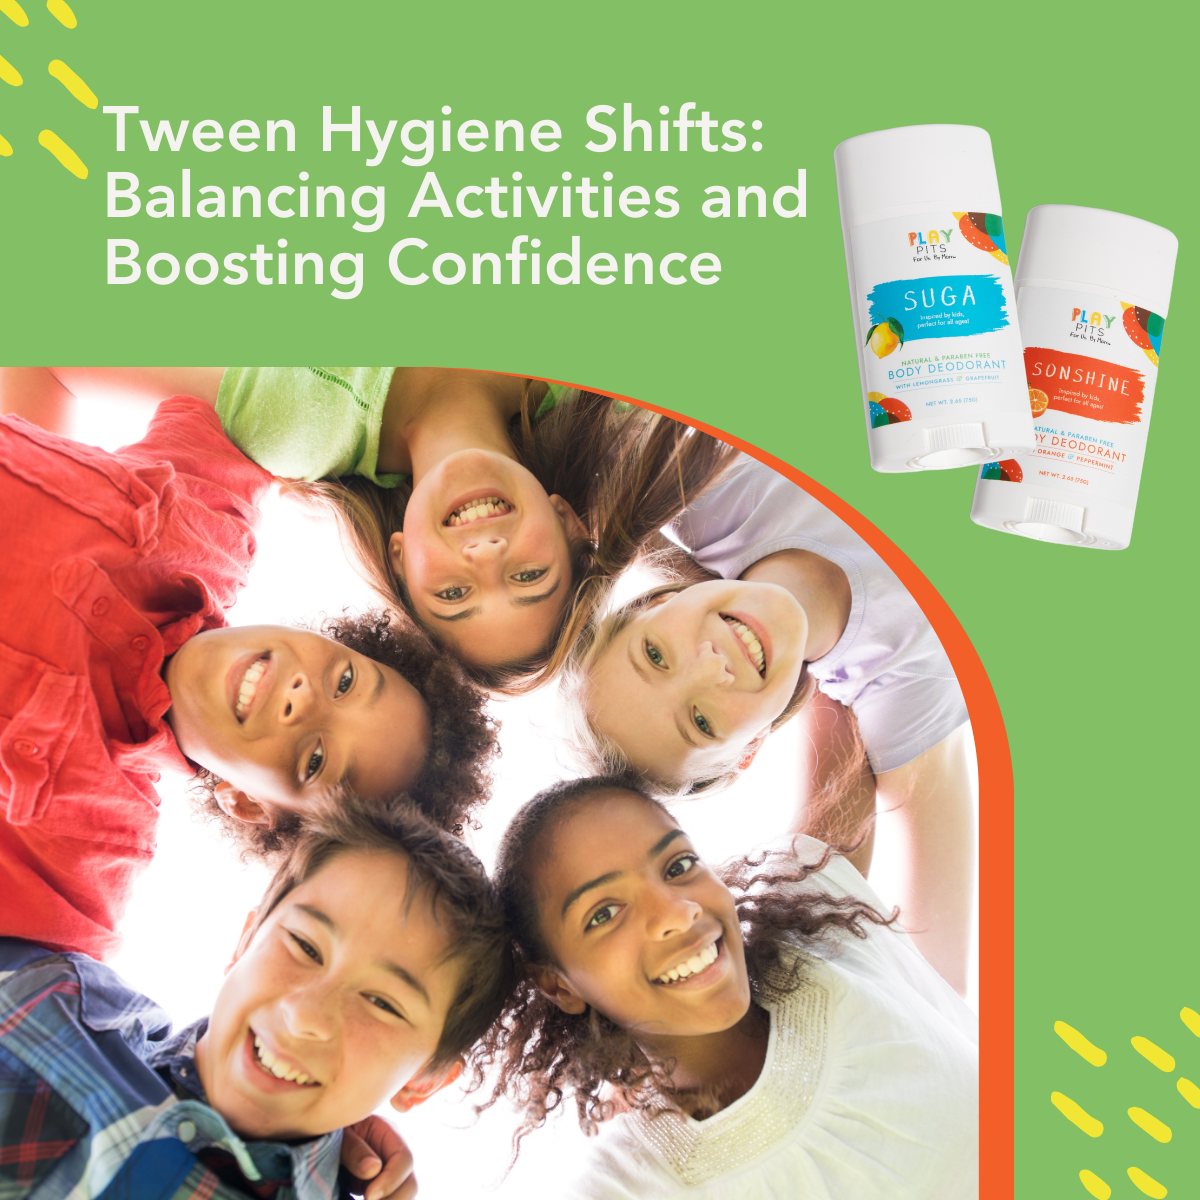 Tween Hygiene Shifts: Balancing Activities and Boosting Confidence